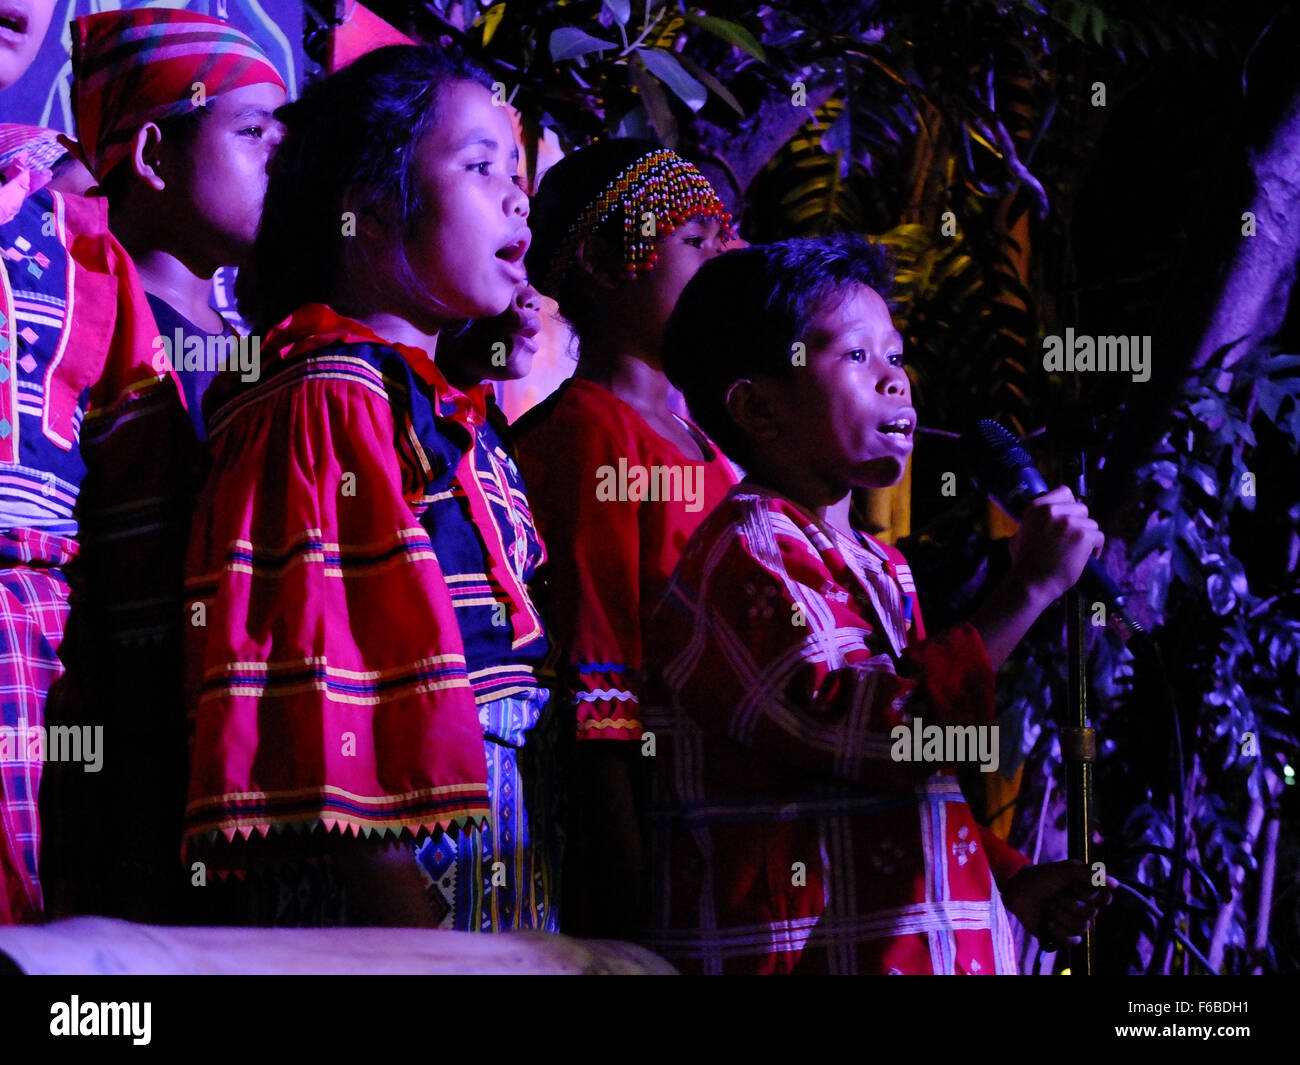 The Lumad children sings a very meaningful message. The Lumad peoples are a group of indigenous people of the southern Philippines. It is a Cebuano term meaning 'native' or 'indigenous'. The term is short for Katawhang Lumad (literally 'indigenous peoples'), the autonym officially adopted by the delegates of the Lumad Mindanao Peoples Federation (LMPF) founding assembly on 26 June 1986 at the Guadalupe Formation Center, Balindog, Kidapawan, Cotabato, Philippines. It is the self-ascription and collective identity of the indigenous peoples of Mindanao. (Photo by Josefiel Rivera/Pacific Press) Stock Photo